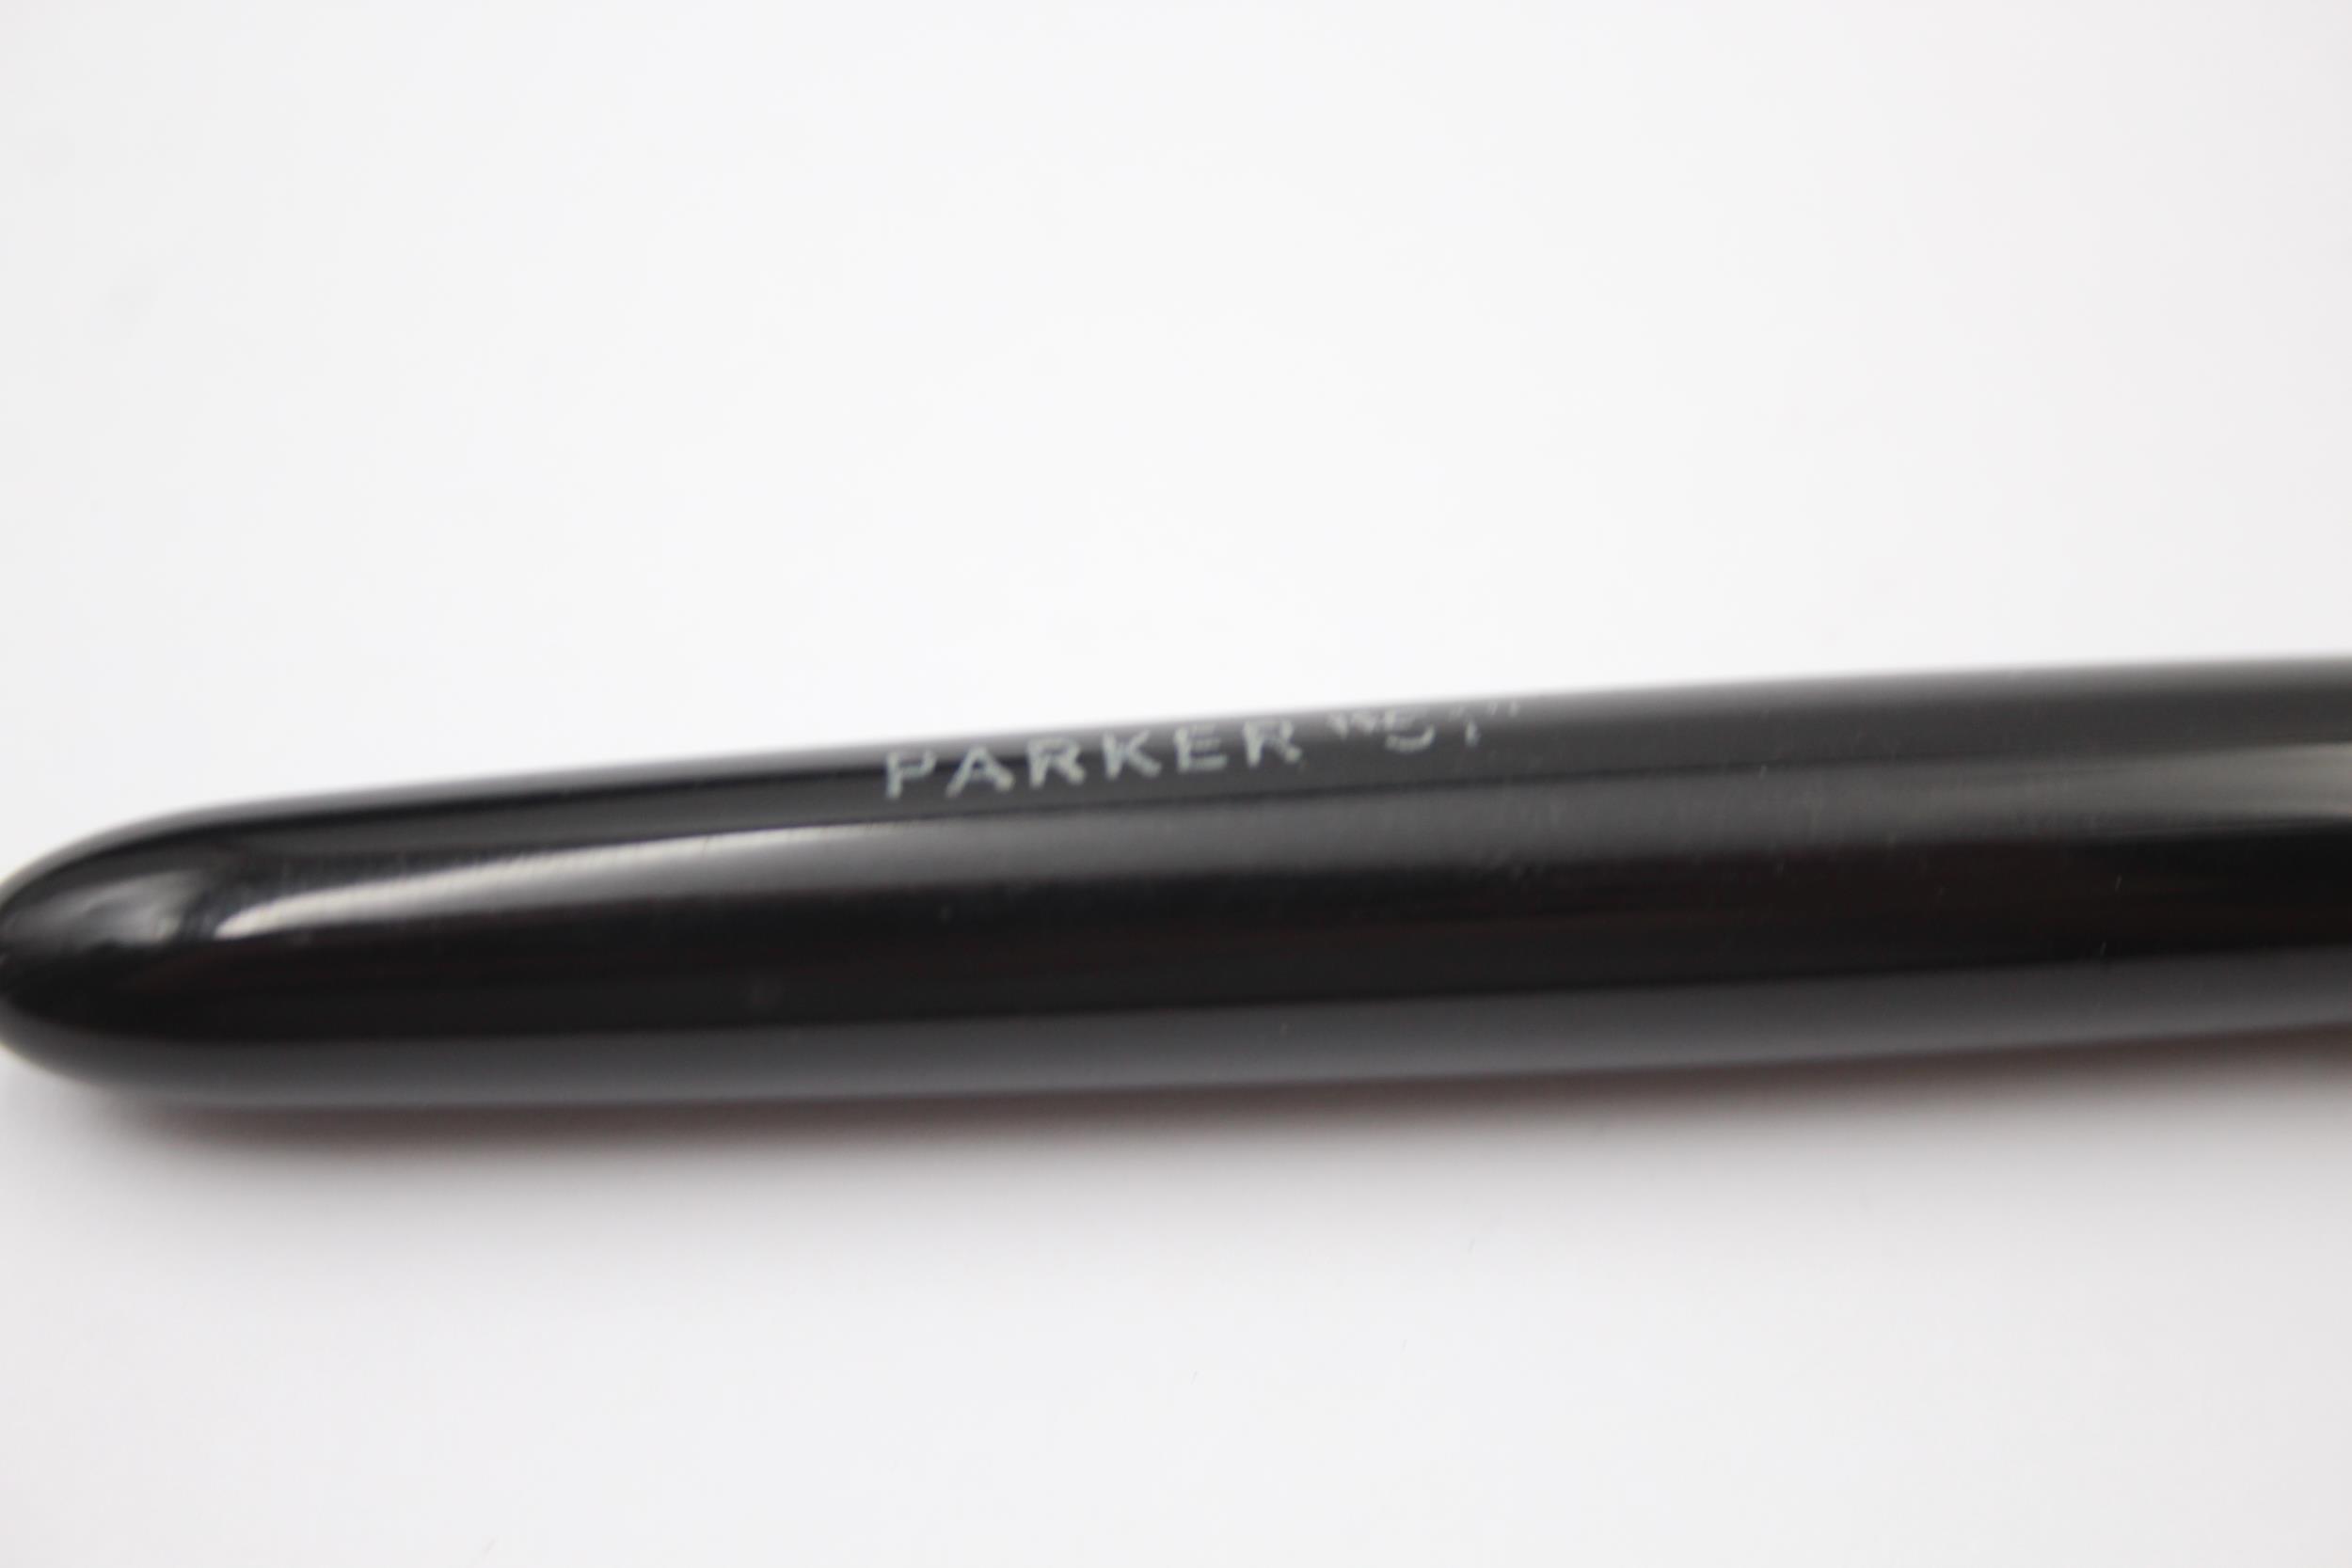 PART CHALK MARKED Vintage PARKER 51 Black Fountain Pen WRITING - Image 6 of 6